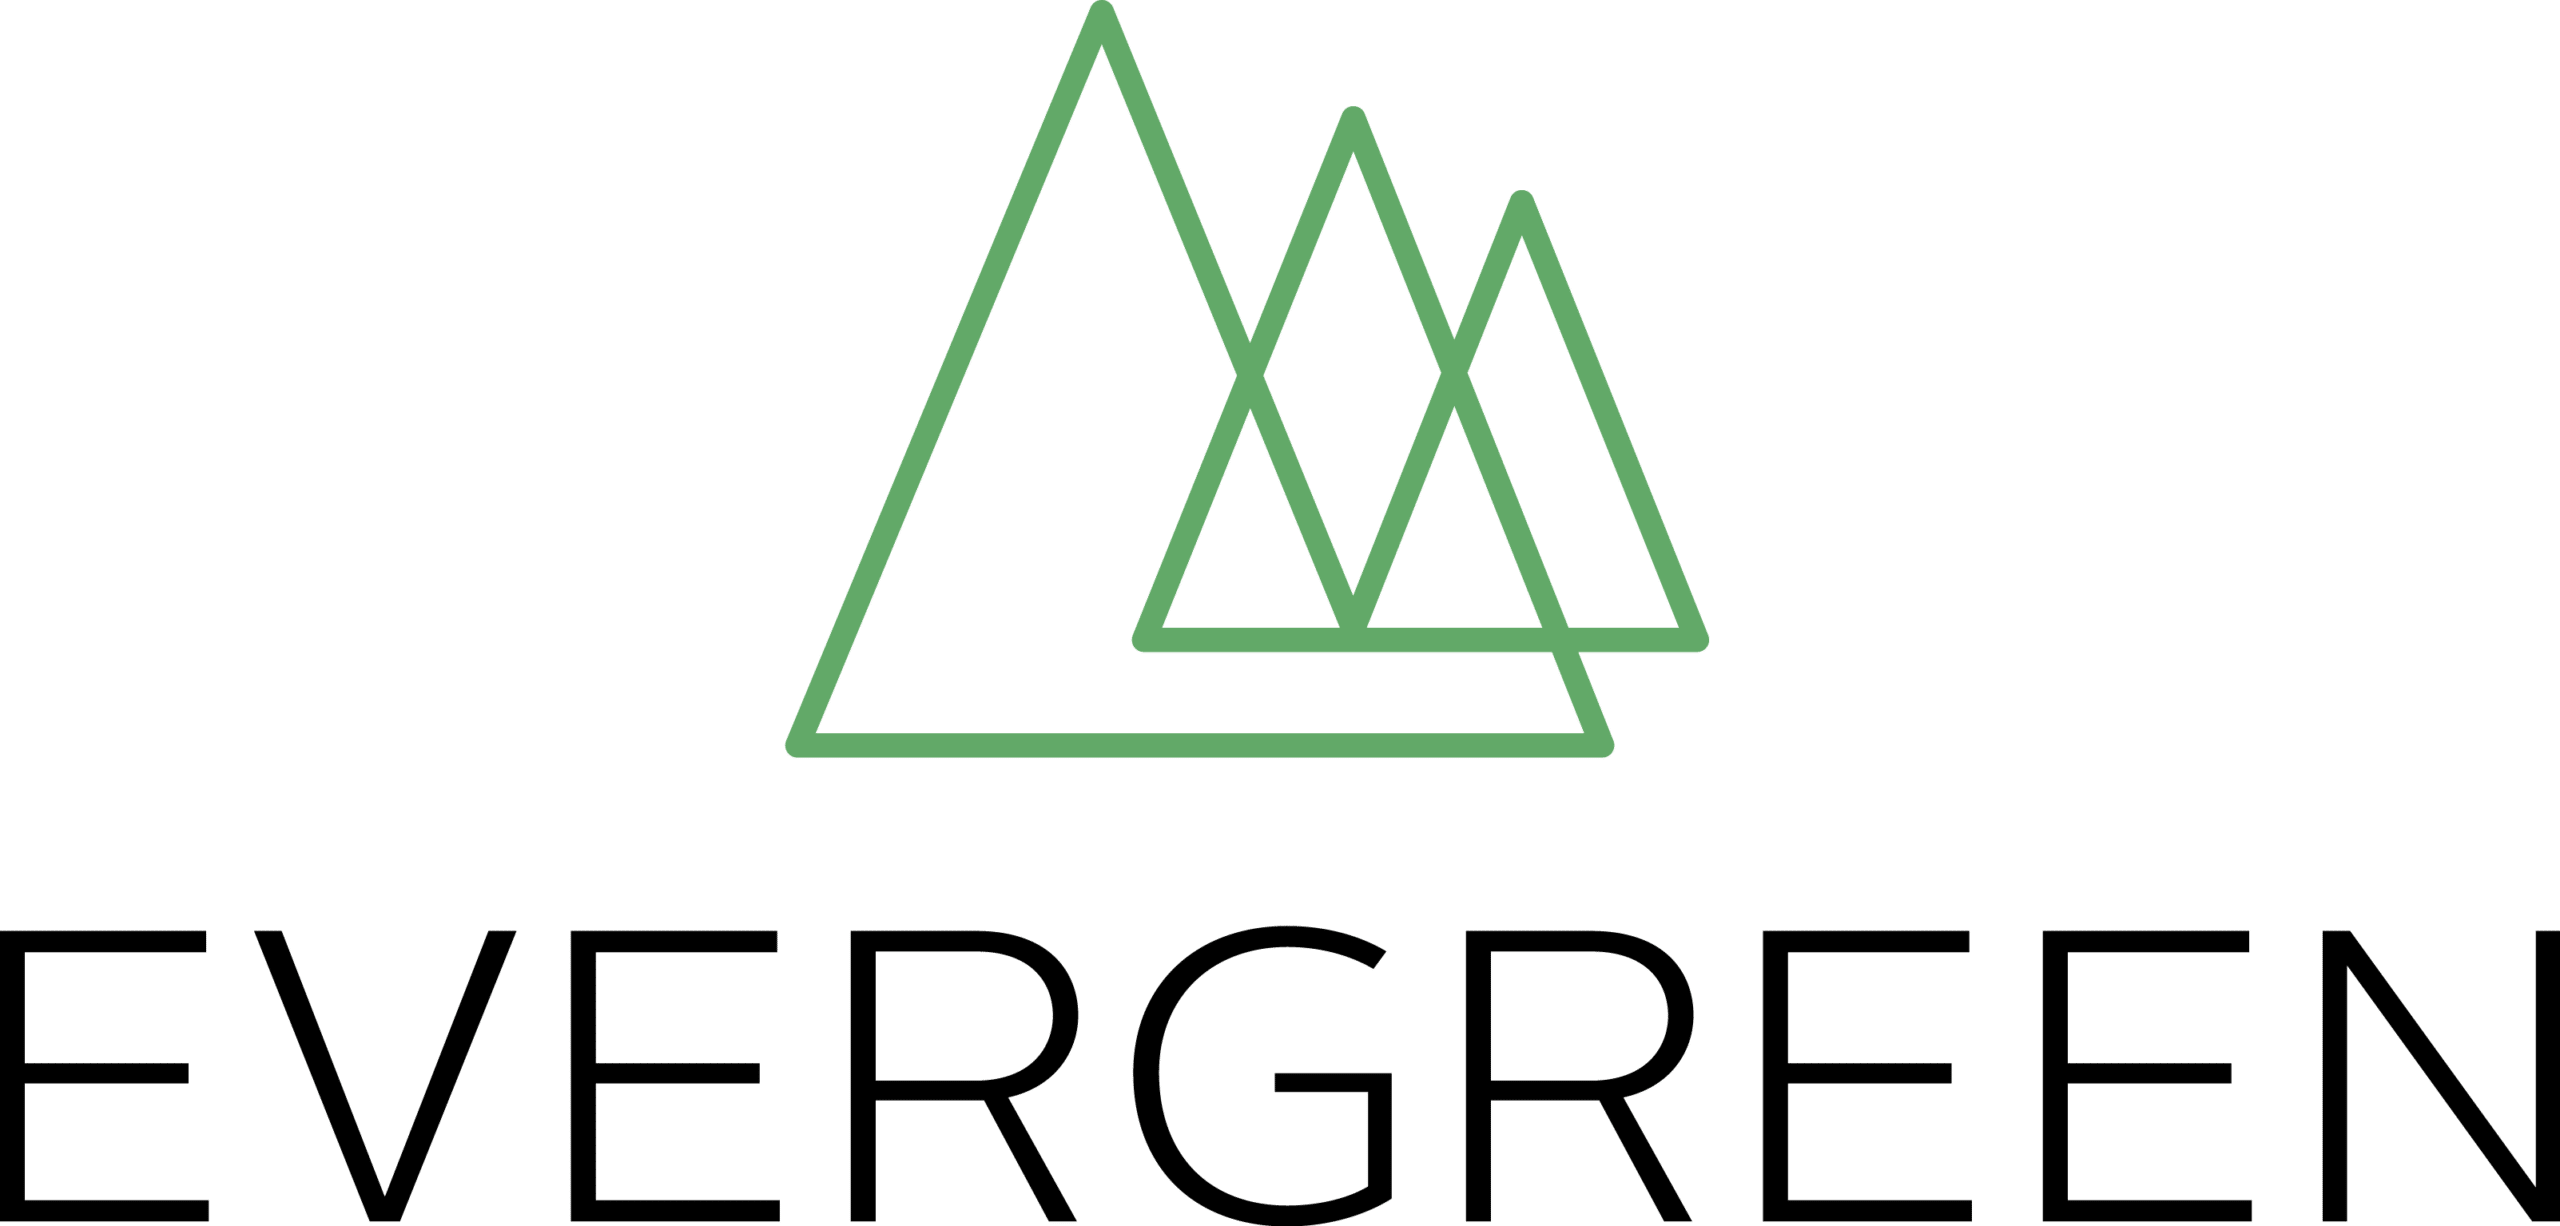 Evergreen Assets Management Announces Signing of MOU with Passion Venture  Capital, a MAS- Licensed Venture Capital Fund Management Firm on Potential  Investments into Evergreen Assets Management